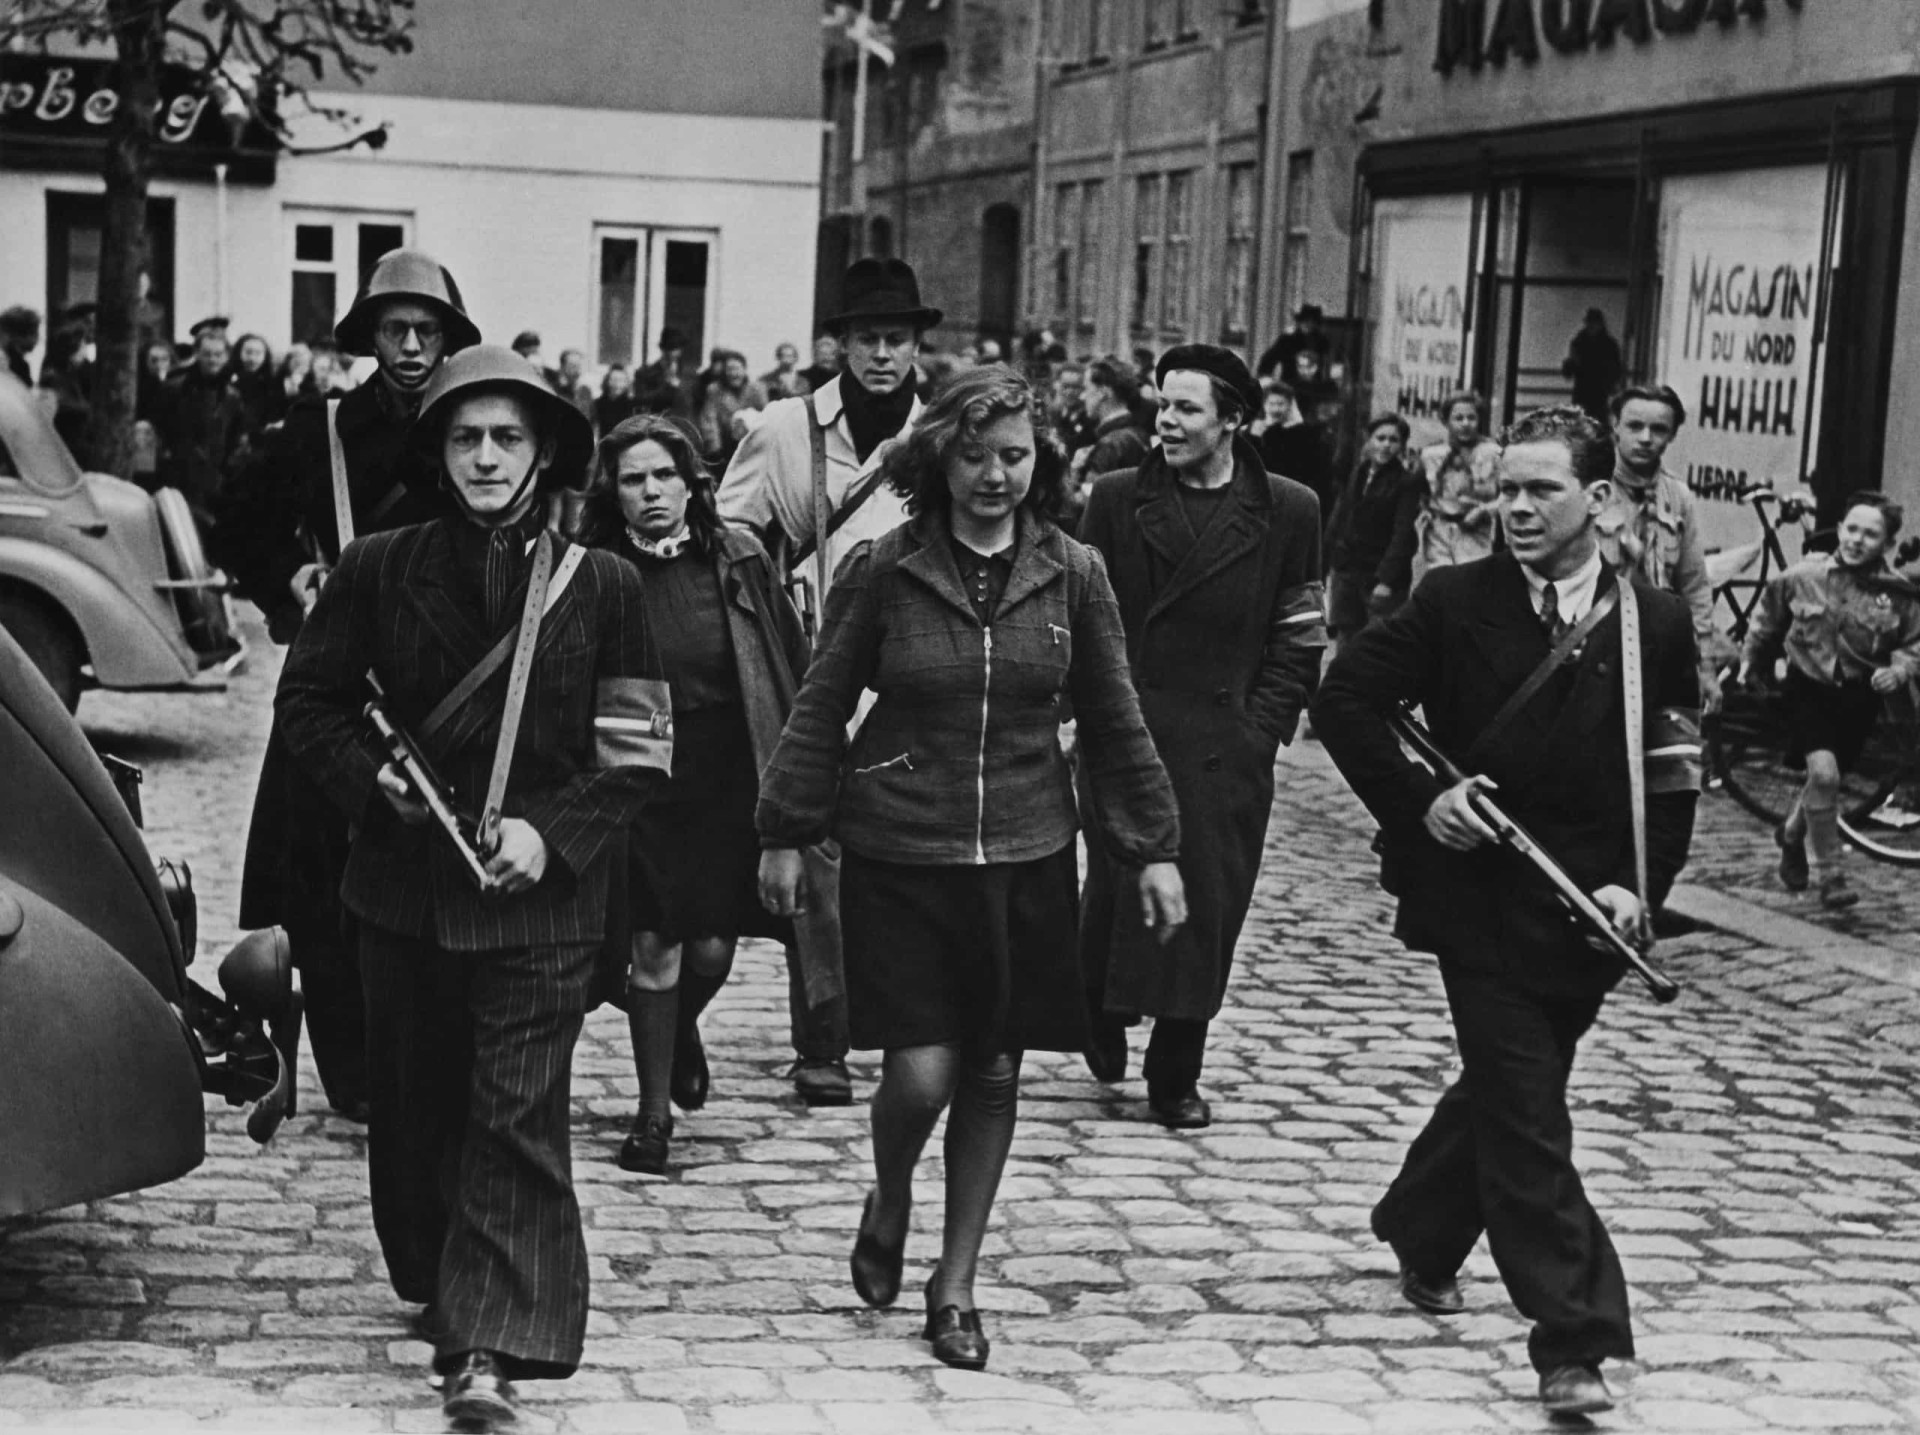 <p>Men and women who collaborated with Nazis were arrested and paraded through urban areas.</p><p><a href="https://www.msn.com/en-my/community/channel/vid-7xx8mnucu55yw63we9va2gwr7uihbxwc68fxqp25x6tg4ftibpra?cvid=94631541bc0f4f89bfd59158d696ad7e">Follow us and access great exclusive content every day</a></p>